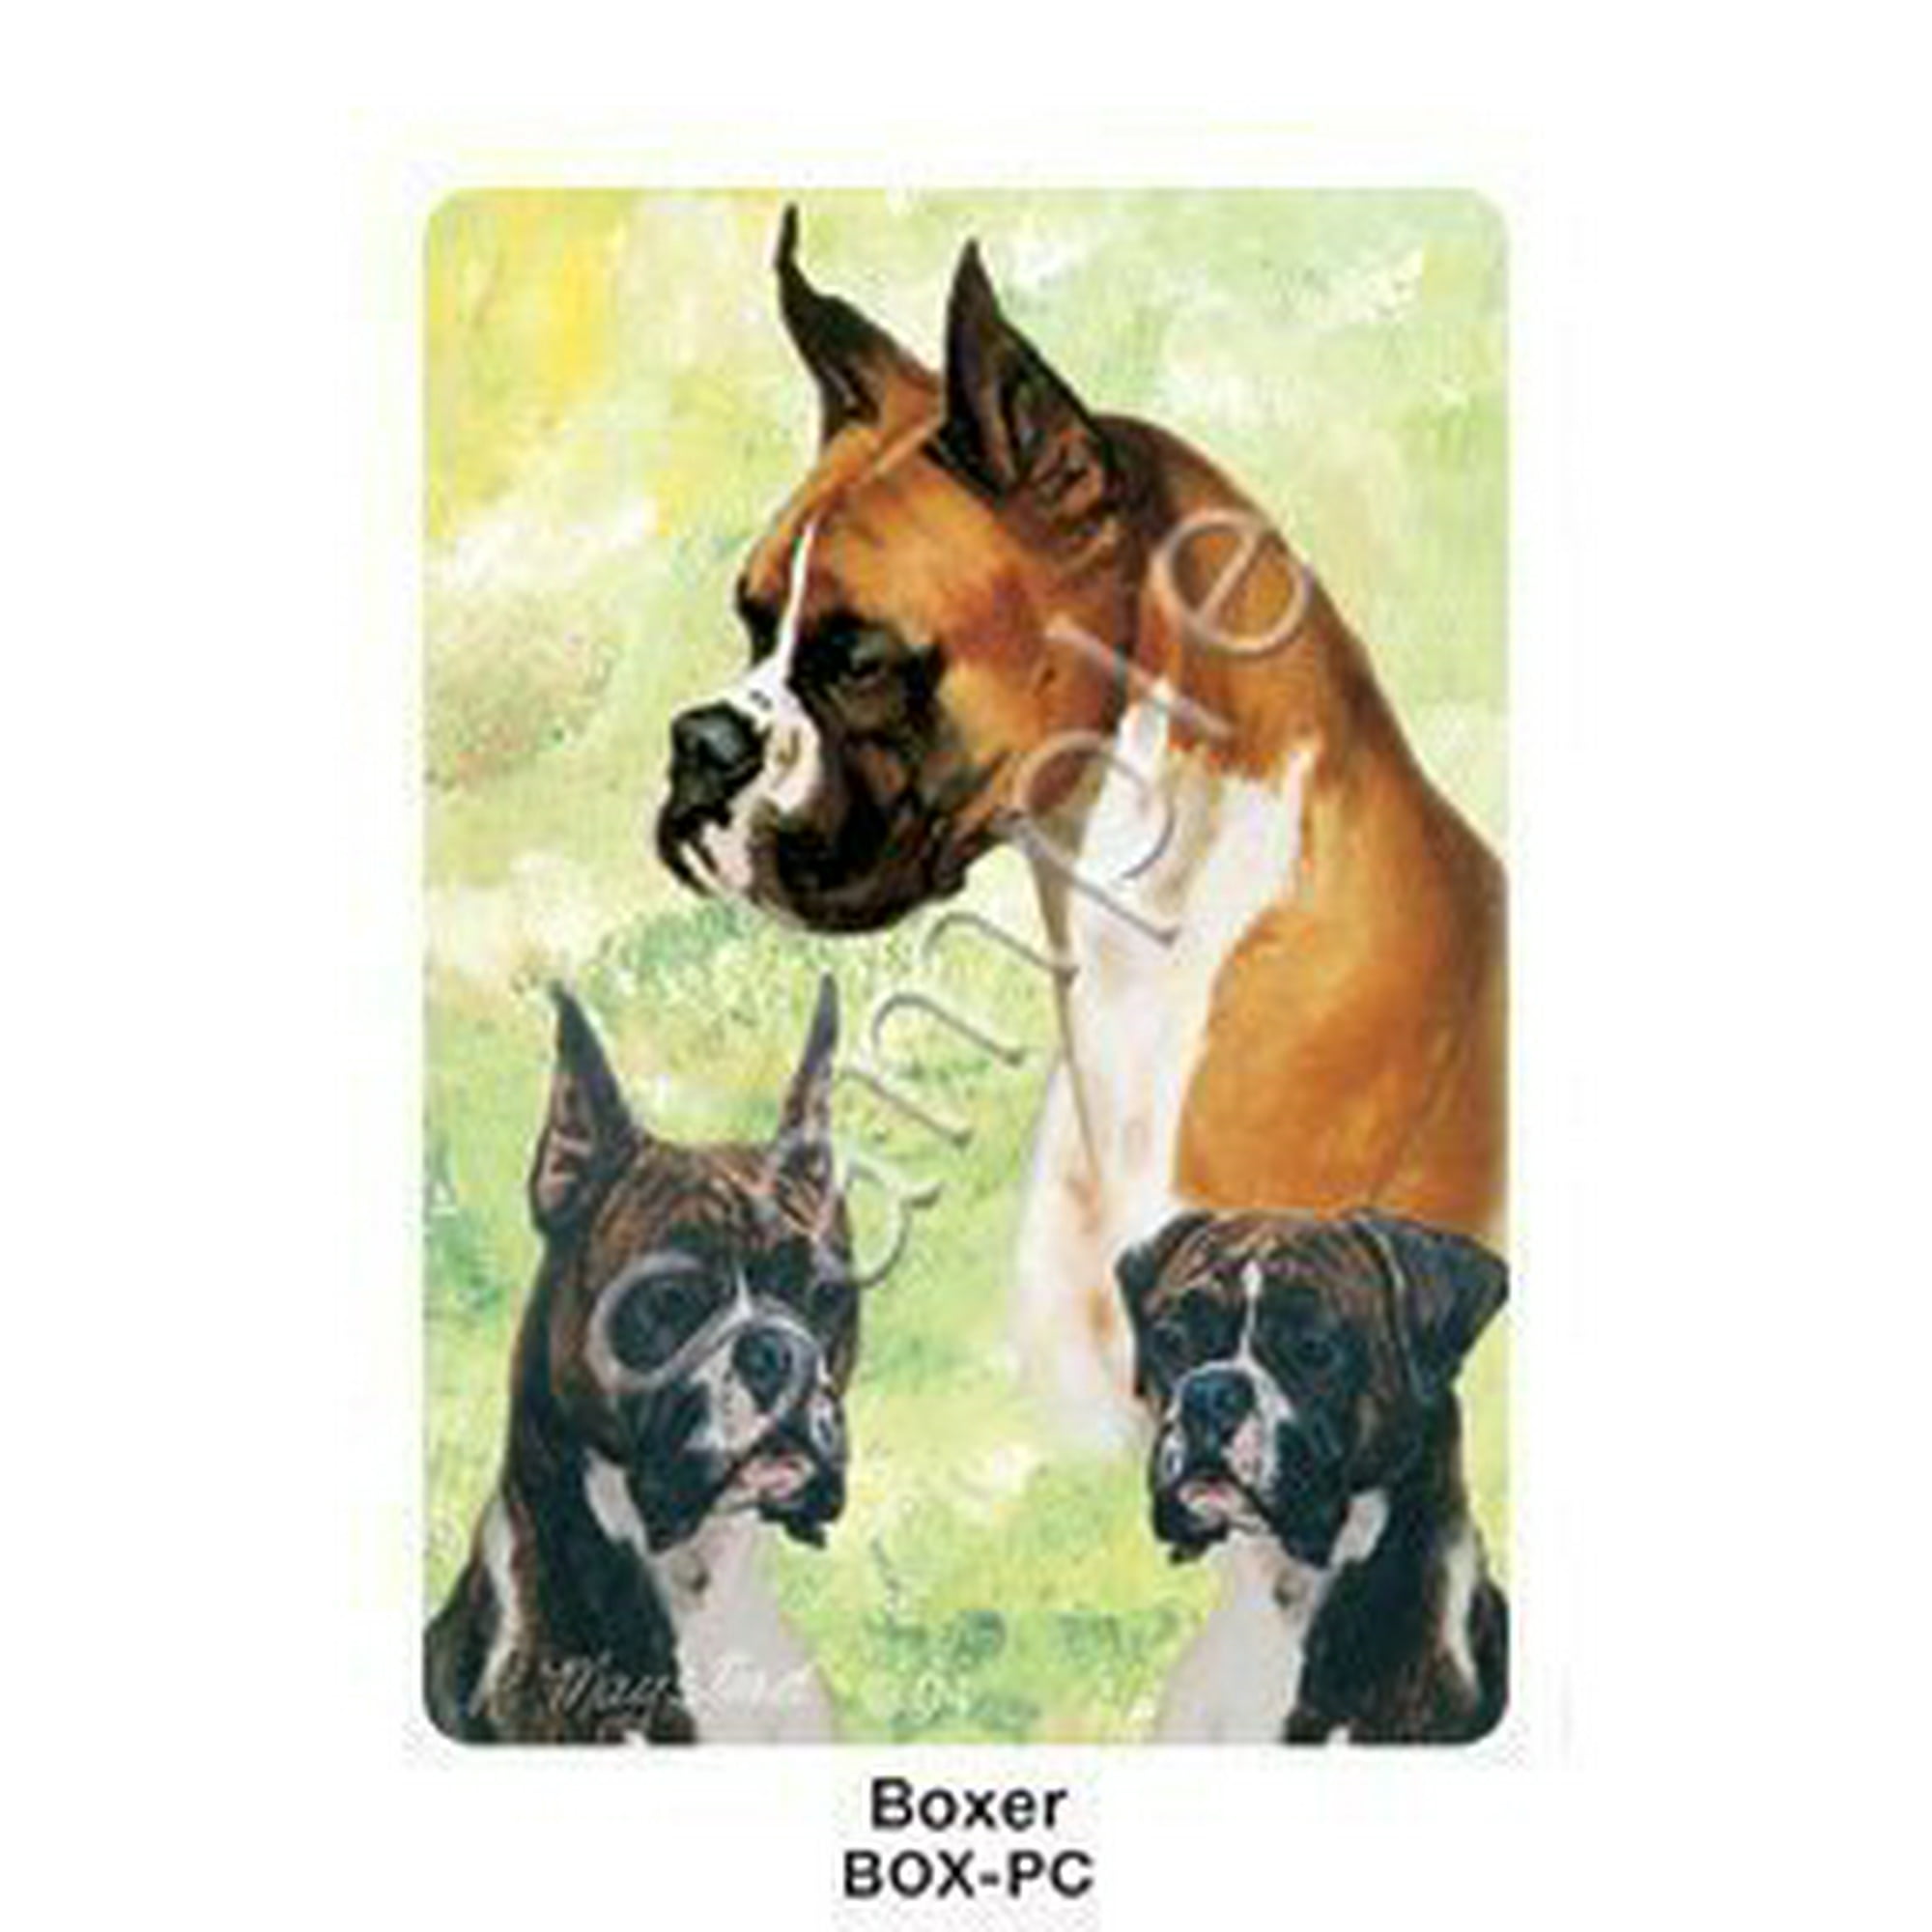 can a boxer and a bulldog be friends